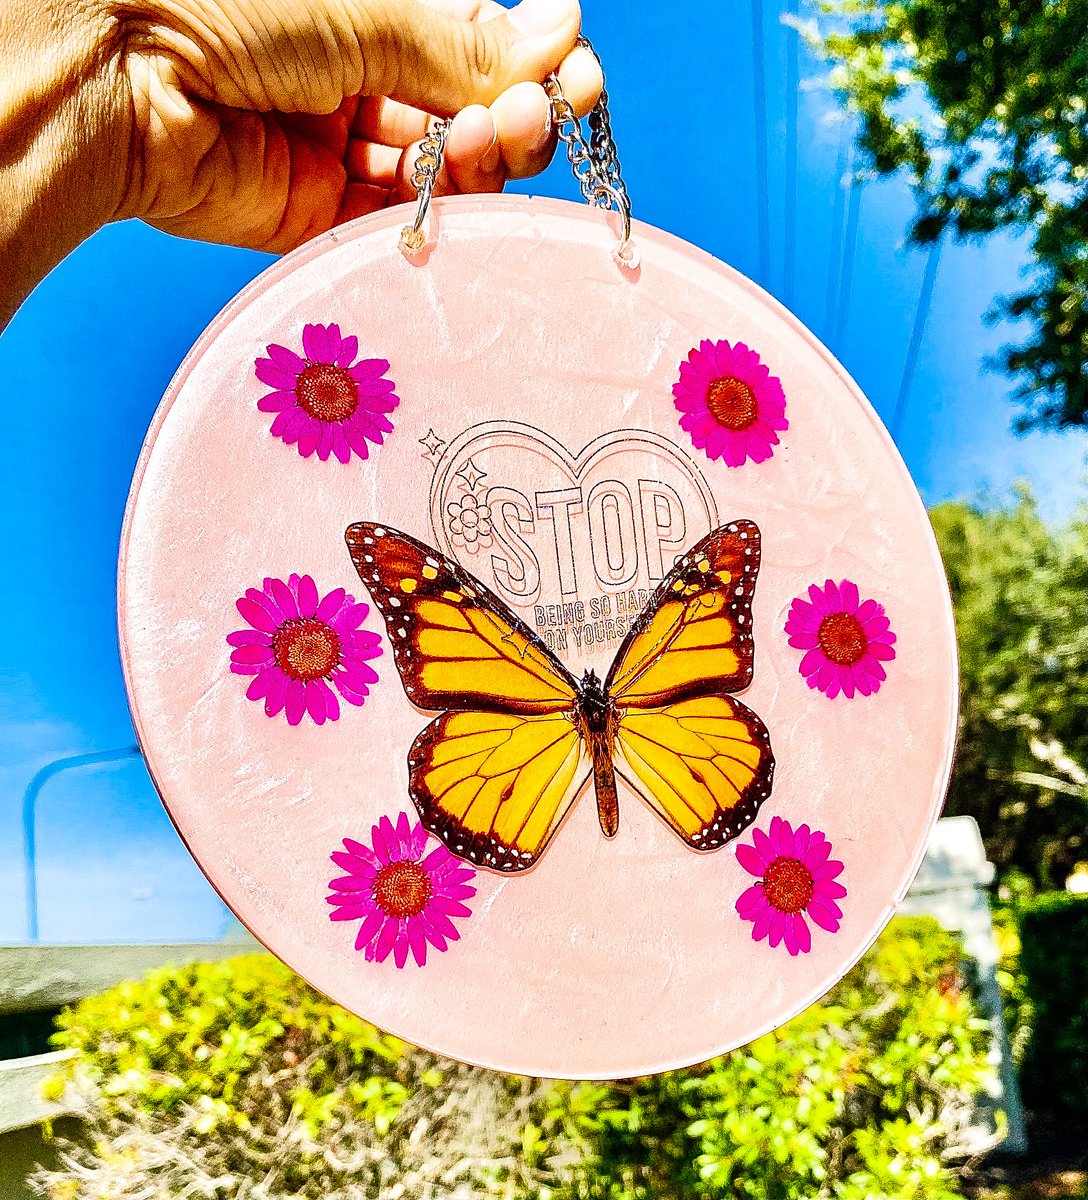 This cutie is looking for a eternal home🌷✨🦋